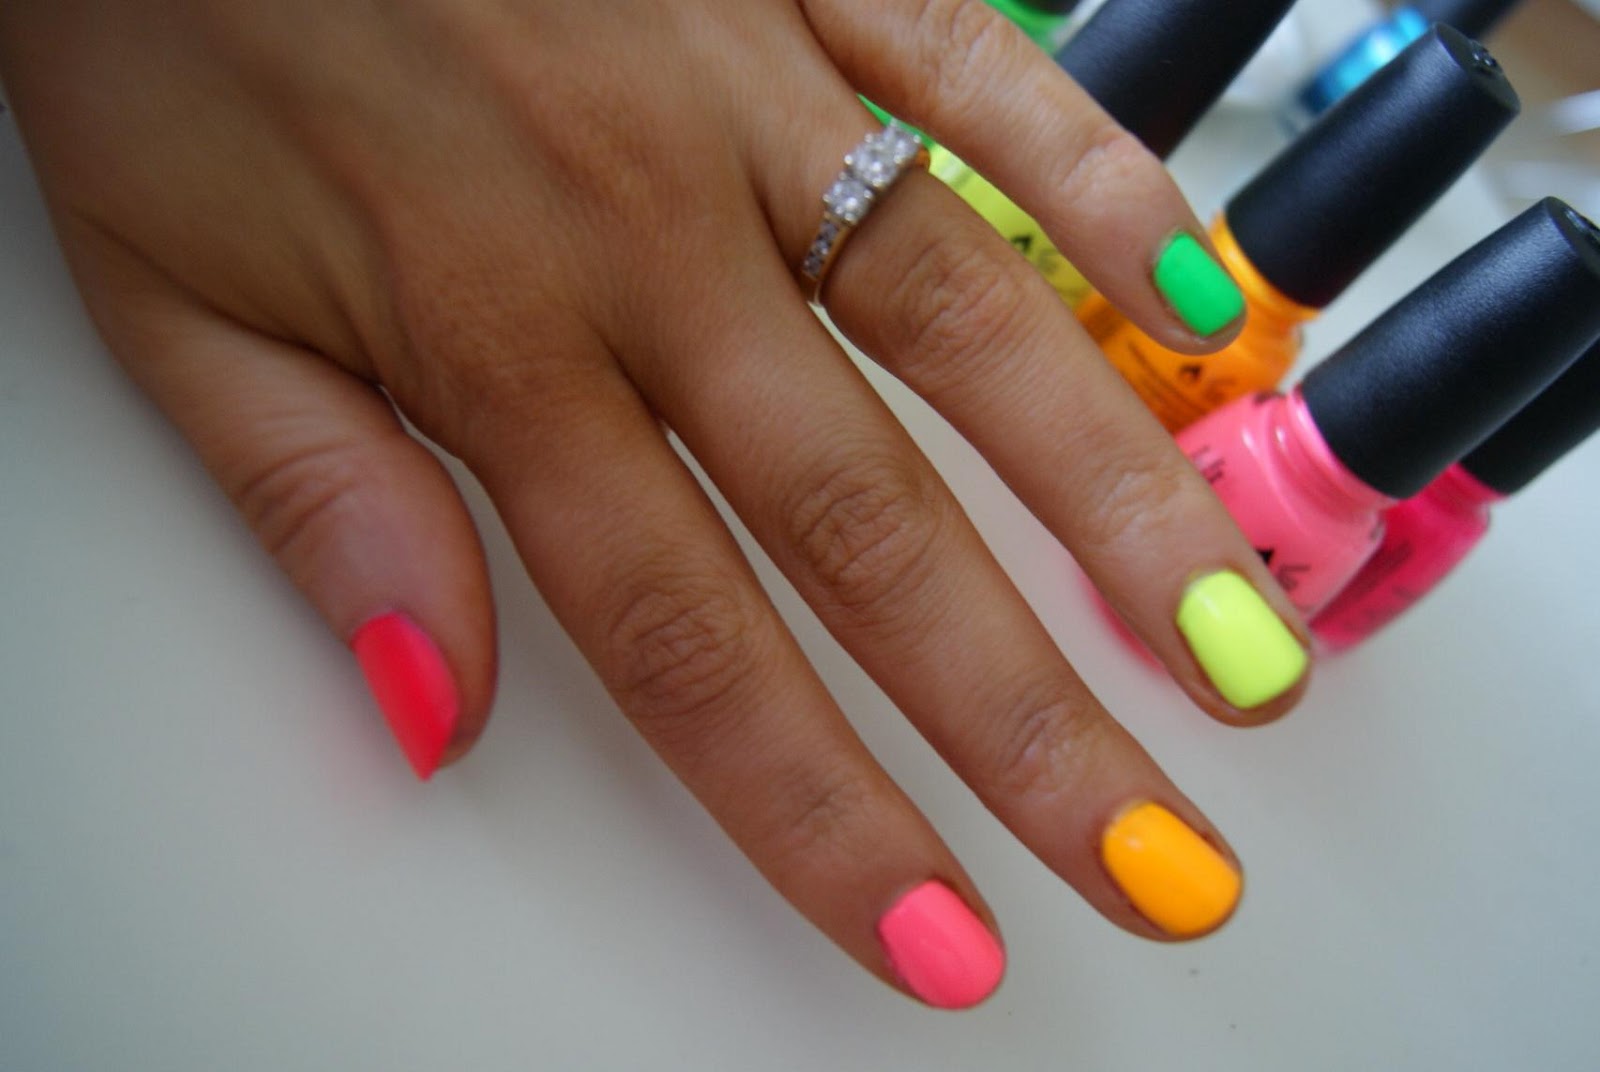 2. Neon Nail Colors That Will Make Your Nails Stand Out - wide 2